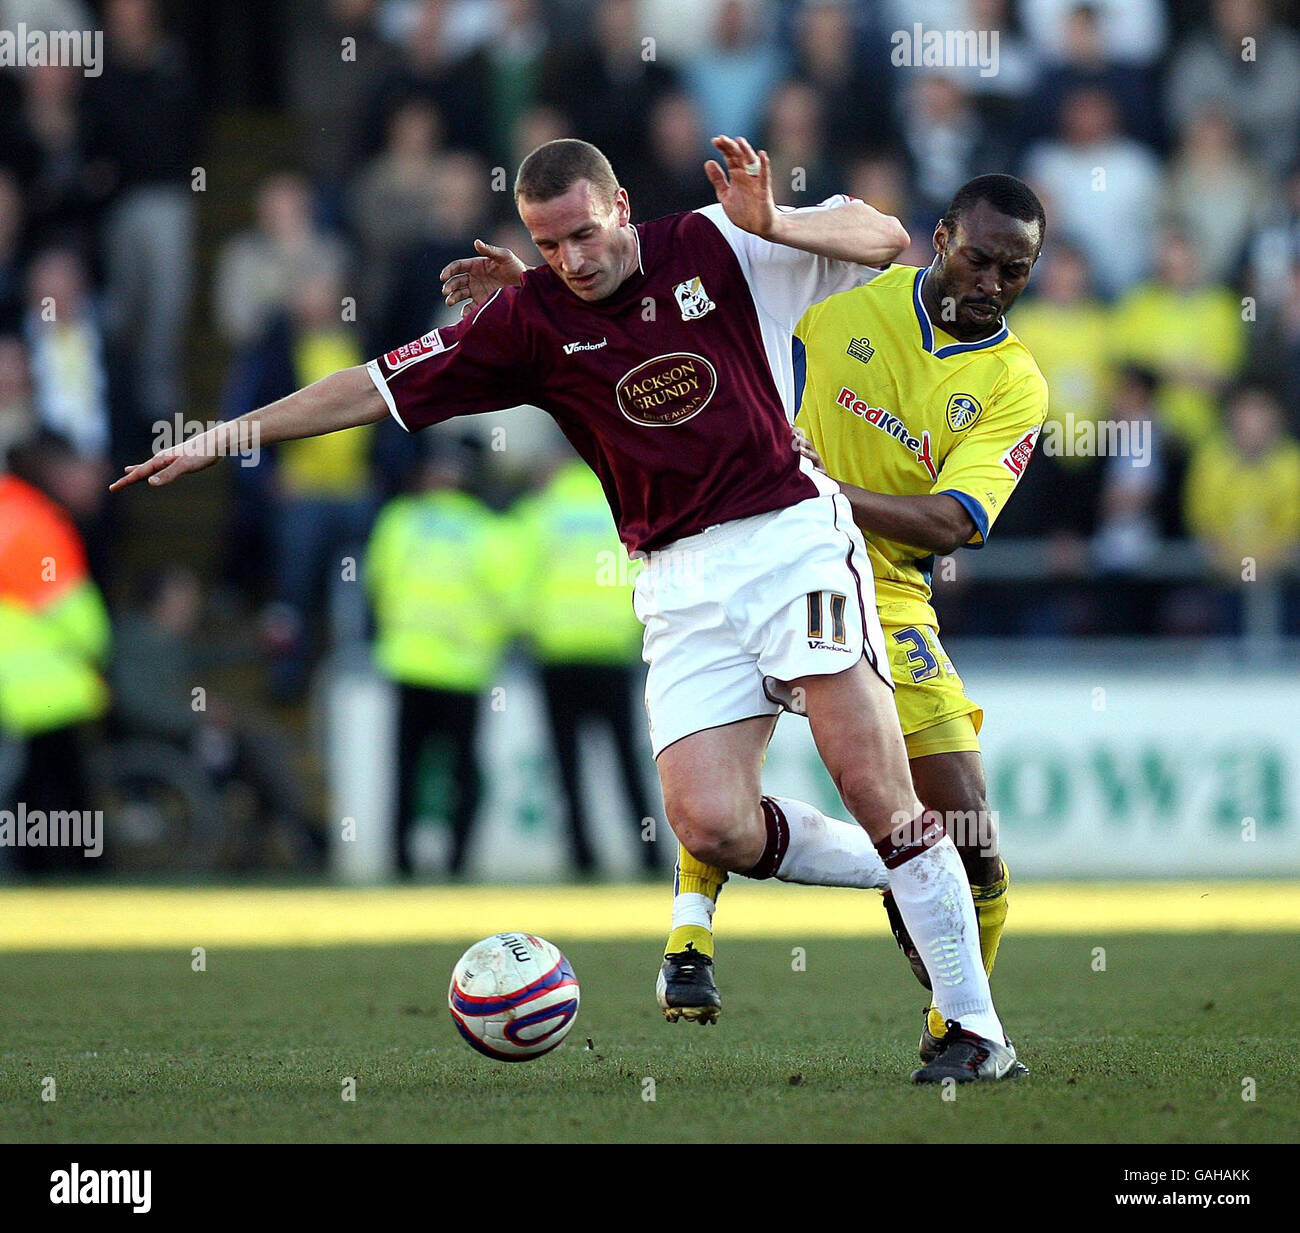 Northampton's Andy Holt (left) in action with Leeds United's Darren Kenton during the League One match at Sixfields Stadium, Northampton. Stock Photo